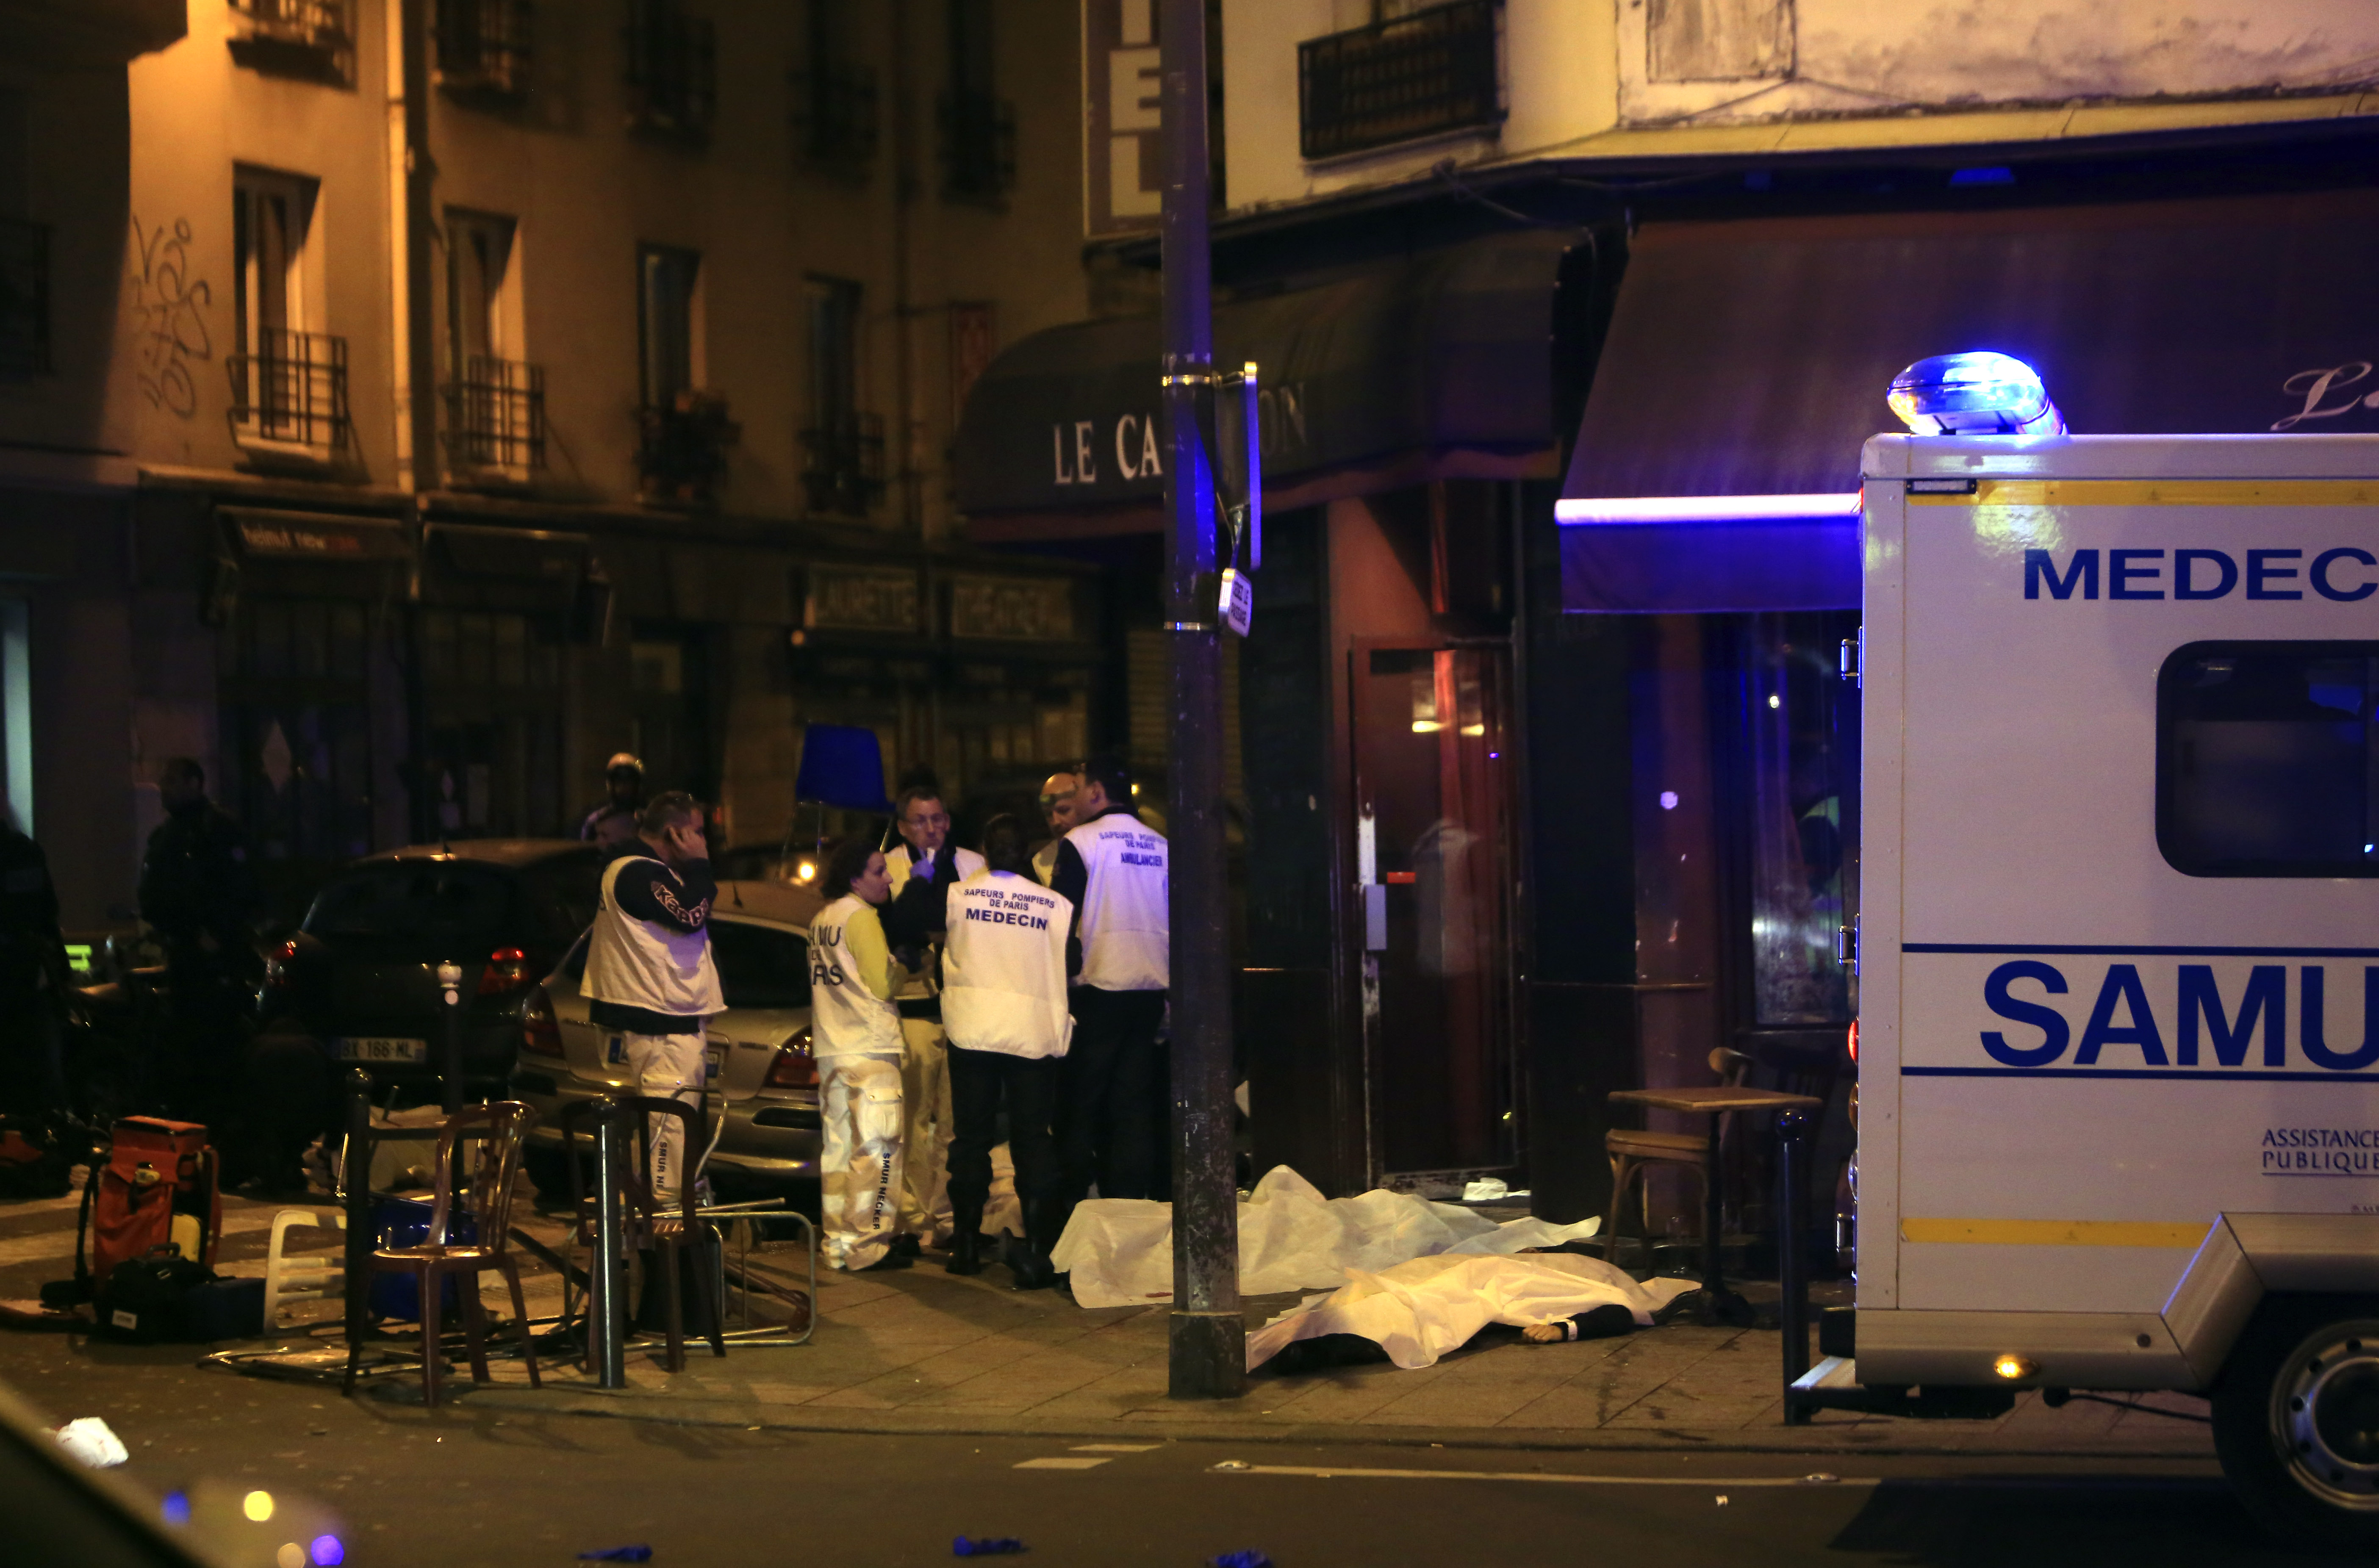 Medics stand by victims in a Paris restaurant, Friday, Nov. 13, 2015. Police officials in France on Friday reported a shootout in a Paris restaurant and an explosion in a bar near a Paris stadium. It was unclear if the events were linked. (AP Photo/Thibault Camus)